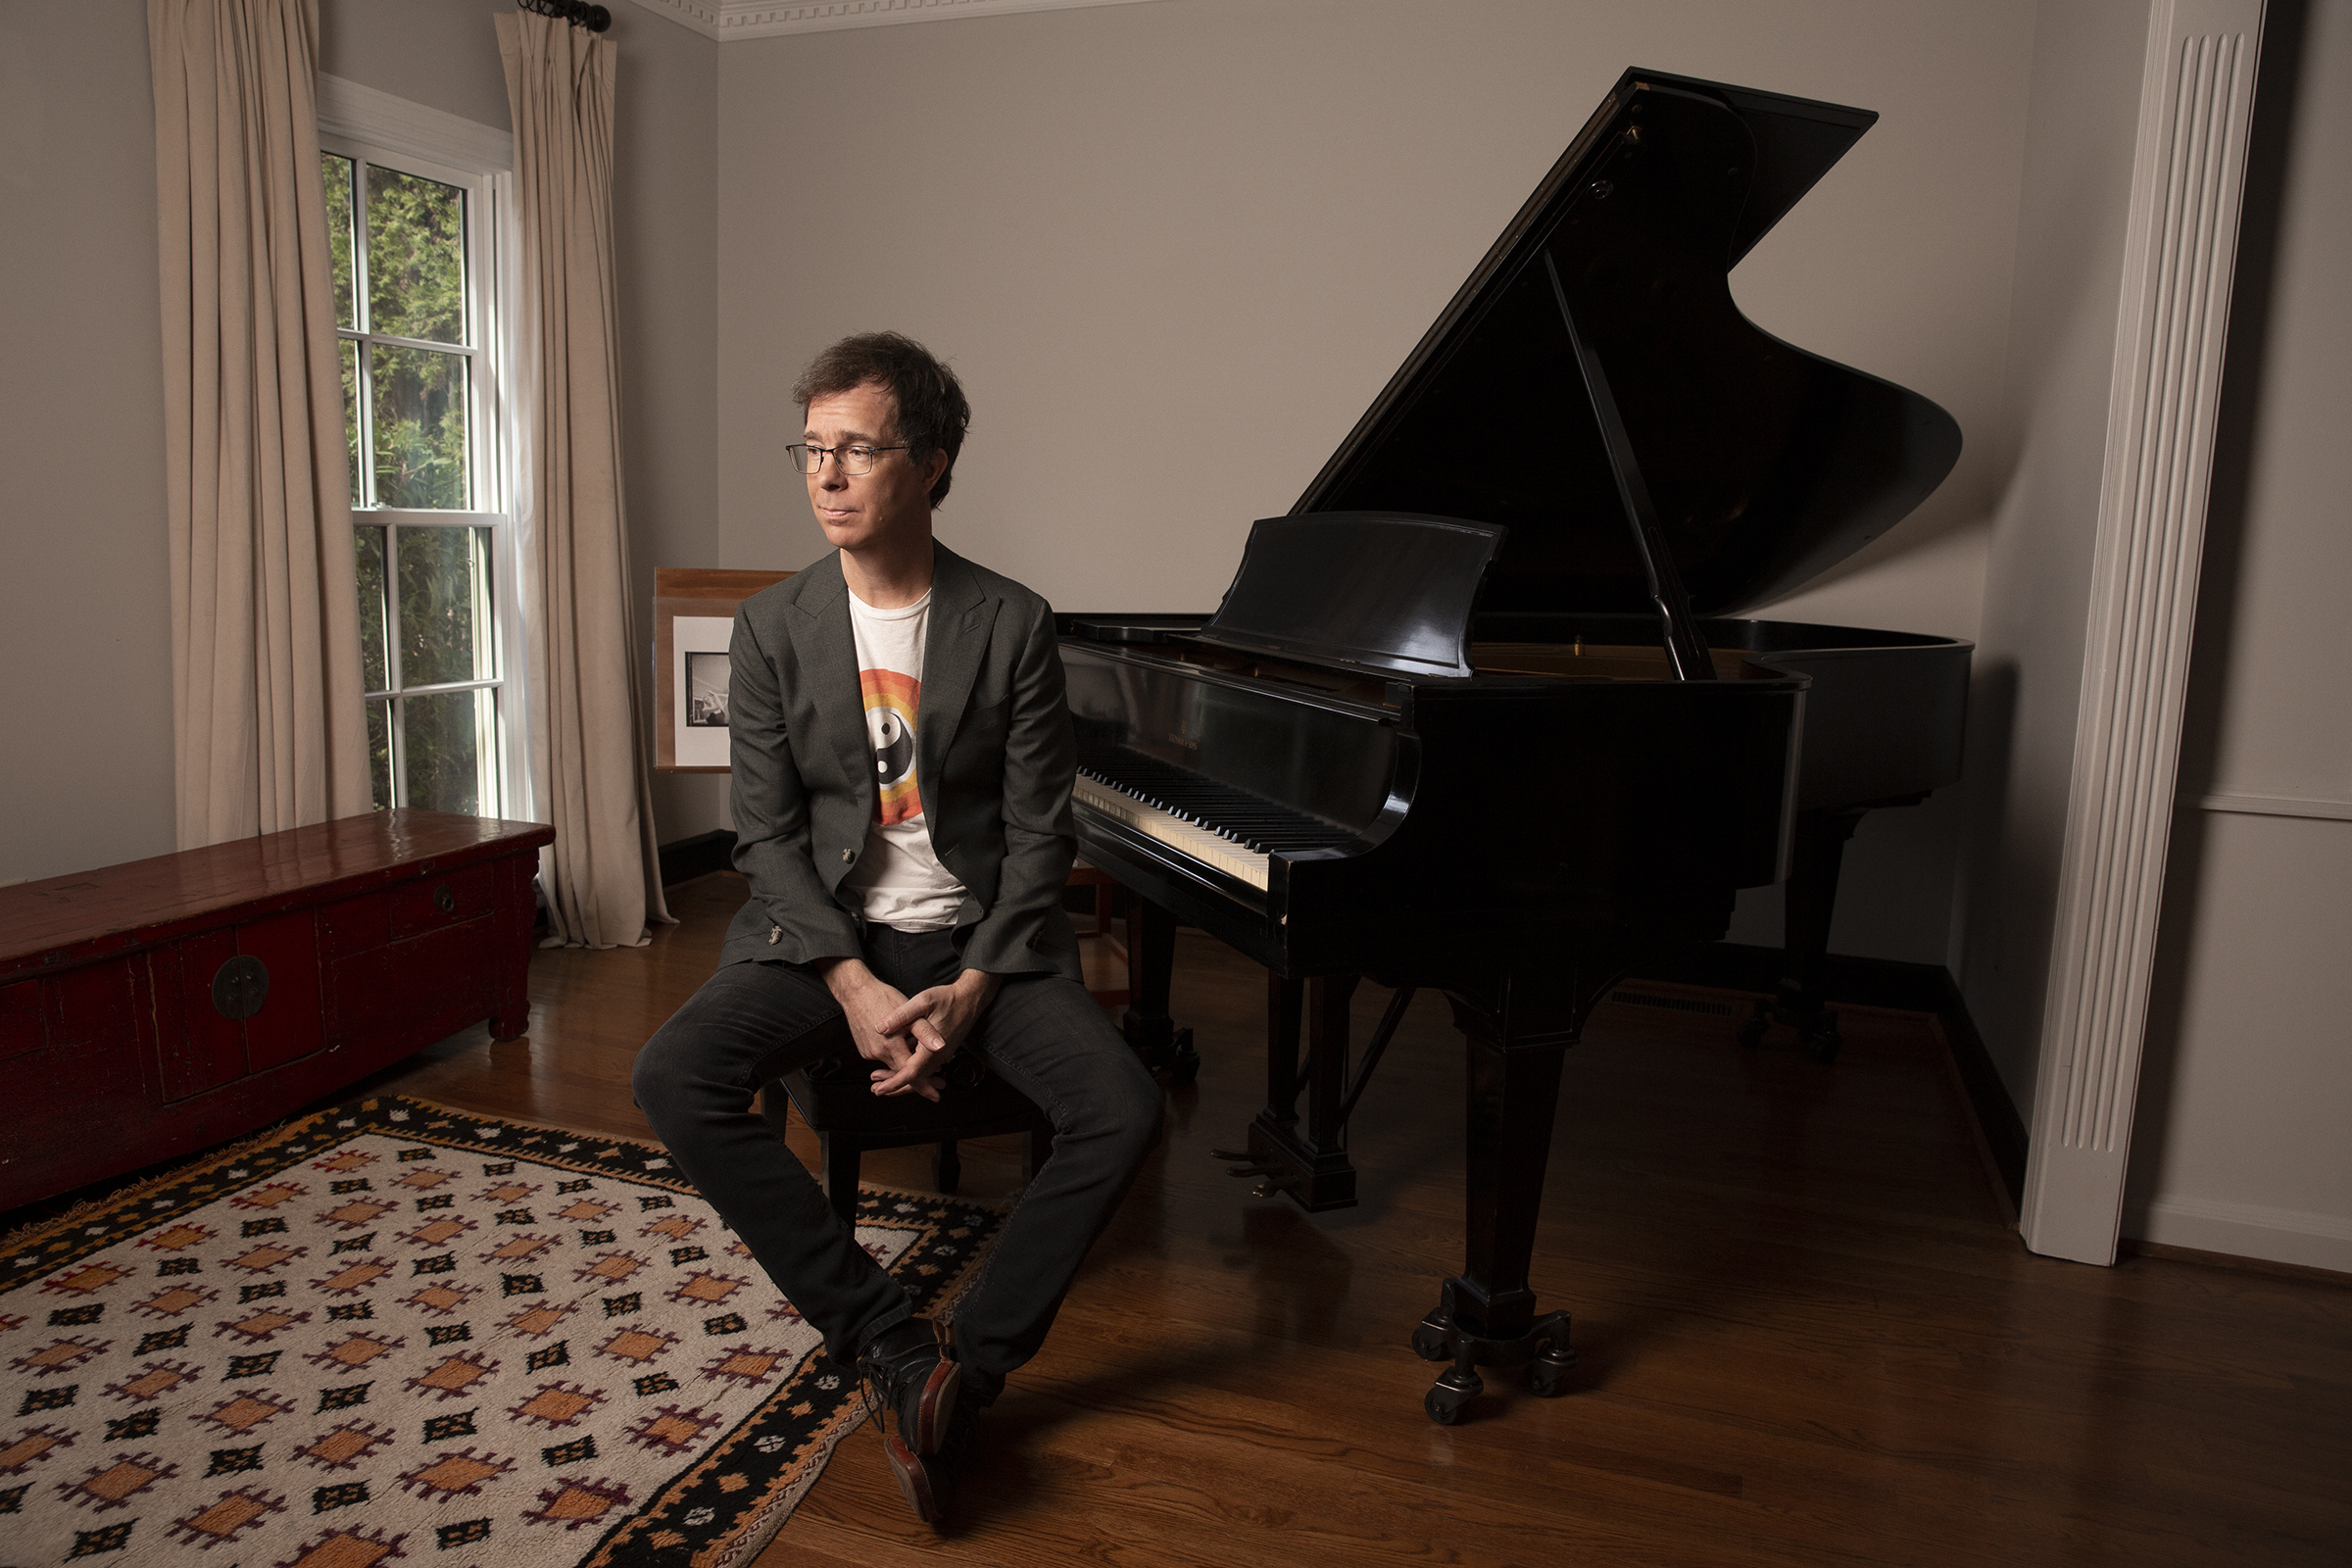 Ben Folds, wearing a jacket and a T-shirt, sits at a piano